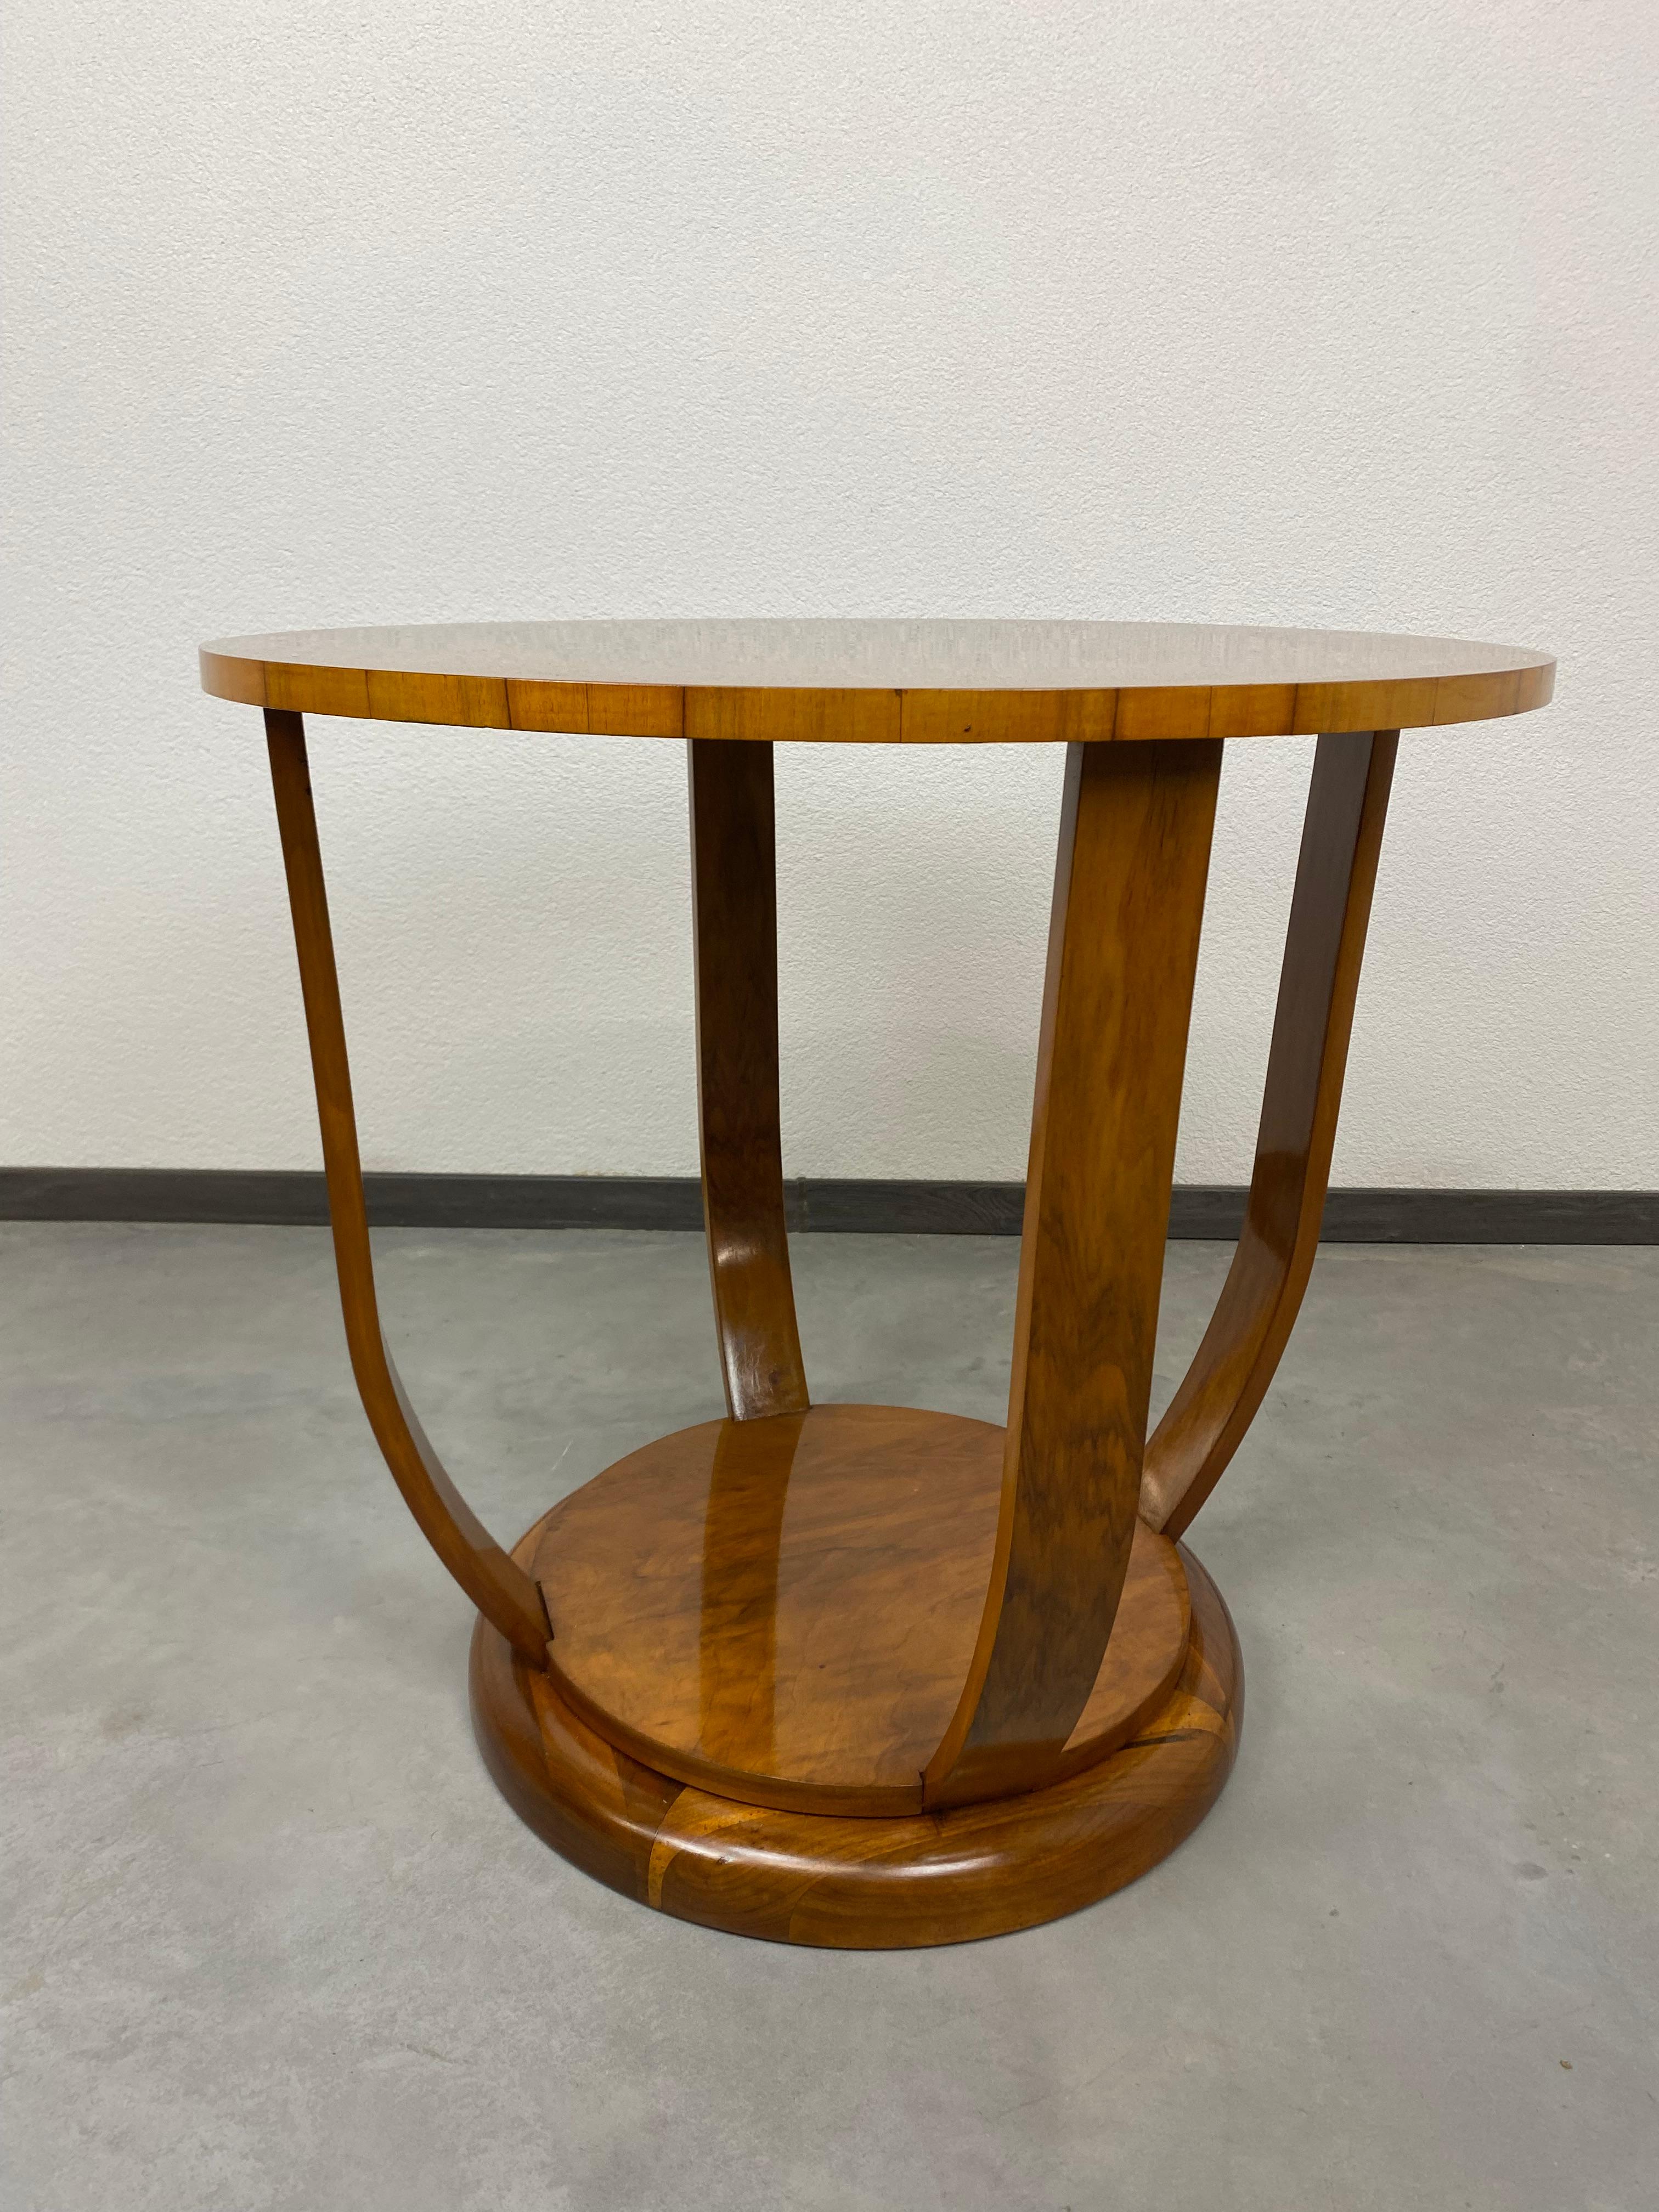 Art Deco cofee table professionally stained and repolished.